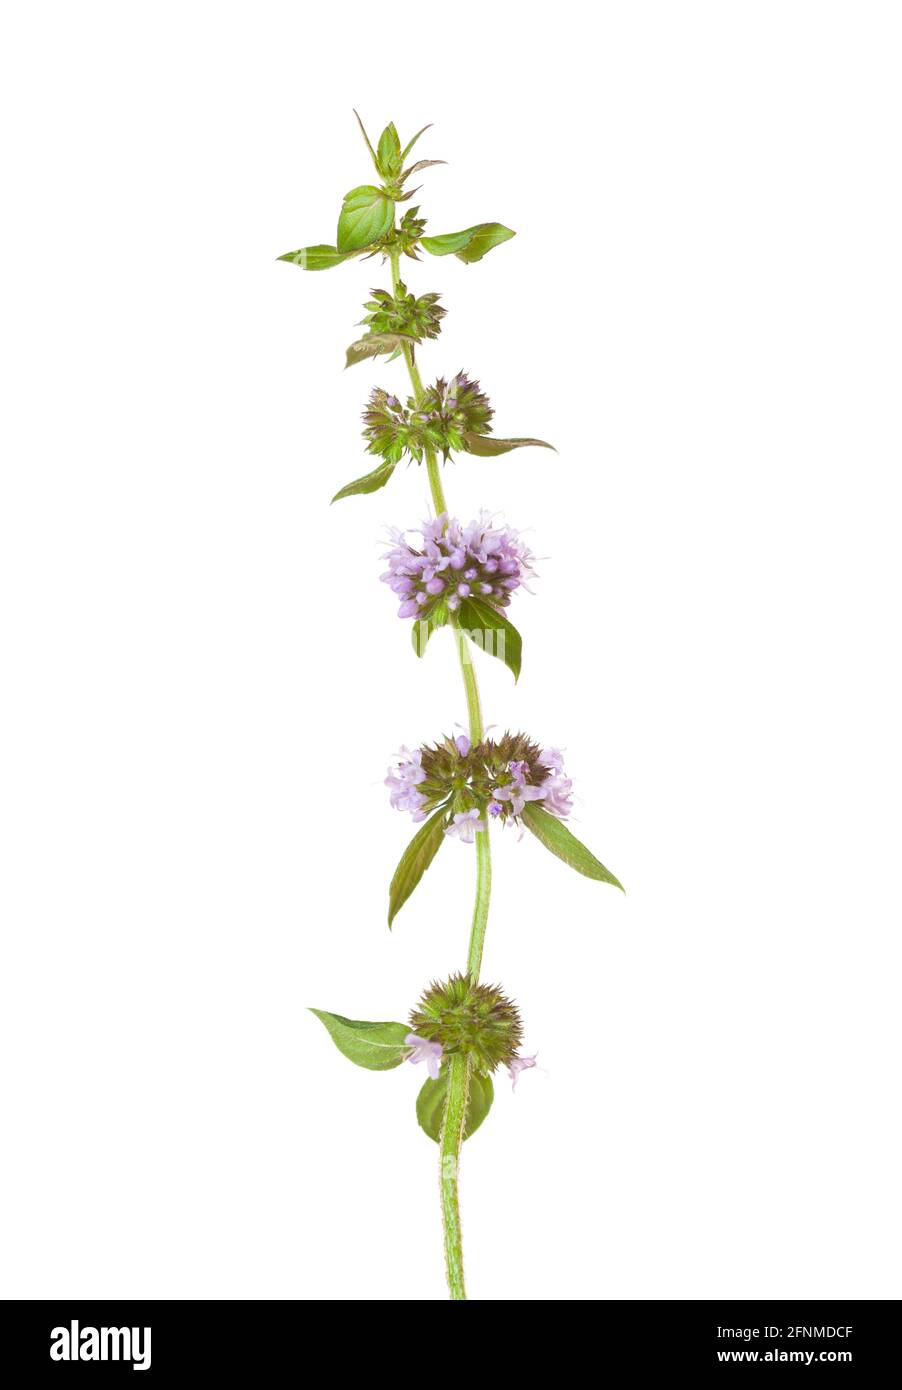 Sprig  of Mentha arvensis (Field Mint or Wild Mint) with  tiny flowers  isolated on white background. Selective focus. Stock Photo